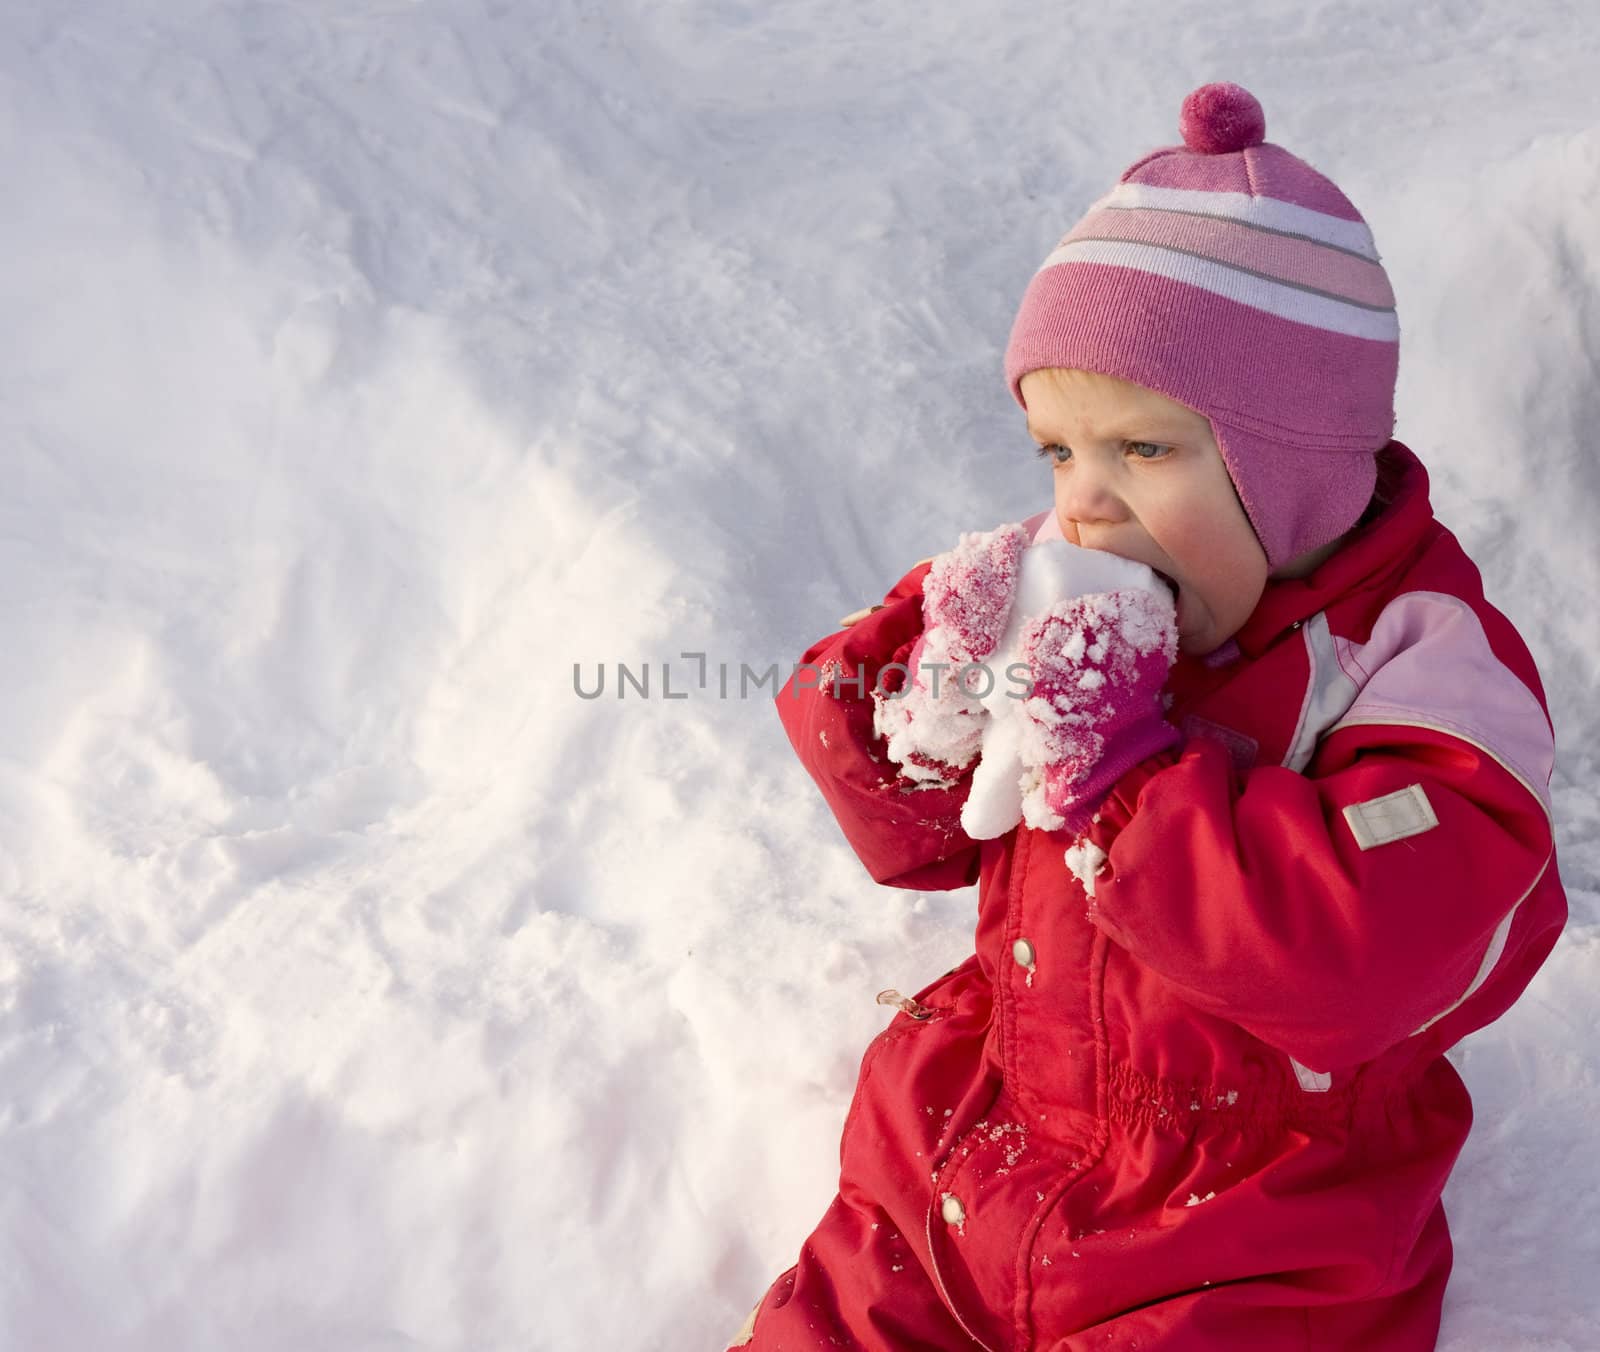 Cute little toddler (2 years old) eating snow.